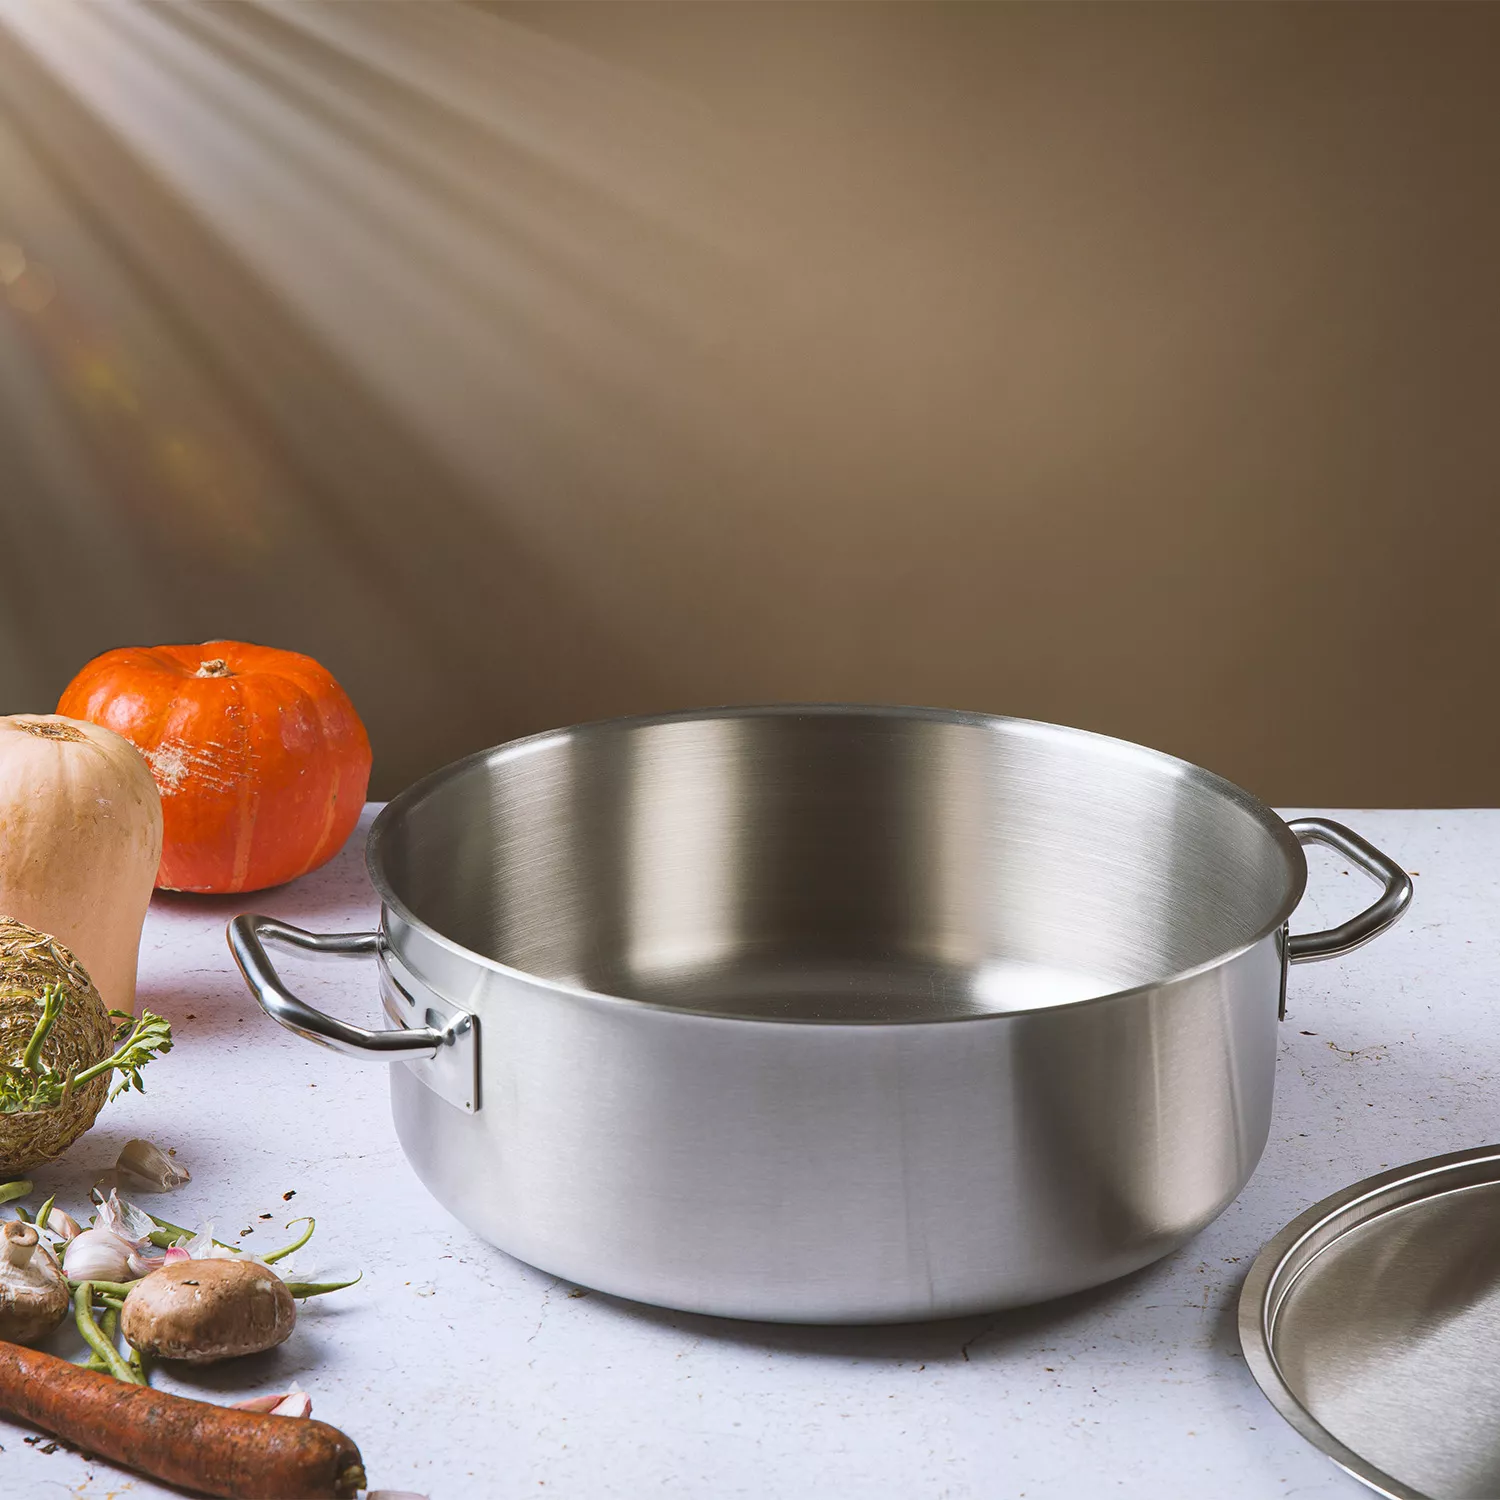 All-Clad Professional Stainless Steel Series Rondeau and Stock Pots(Your  Choice)